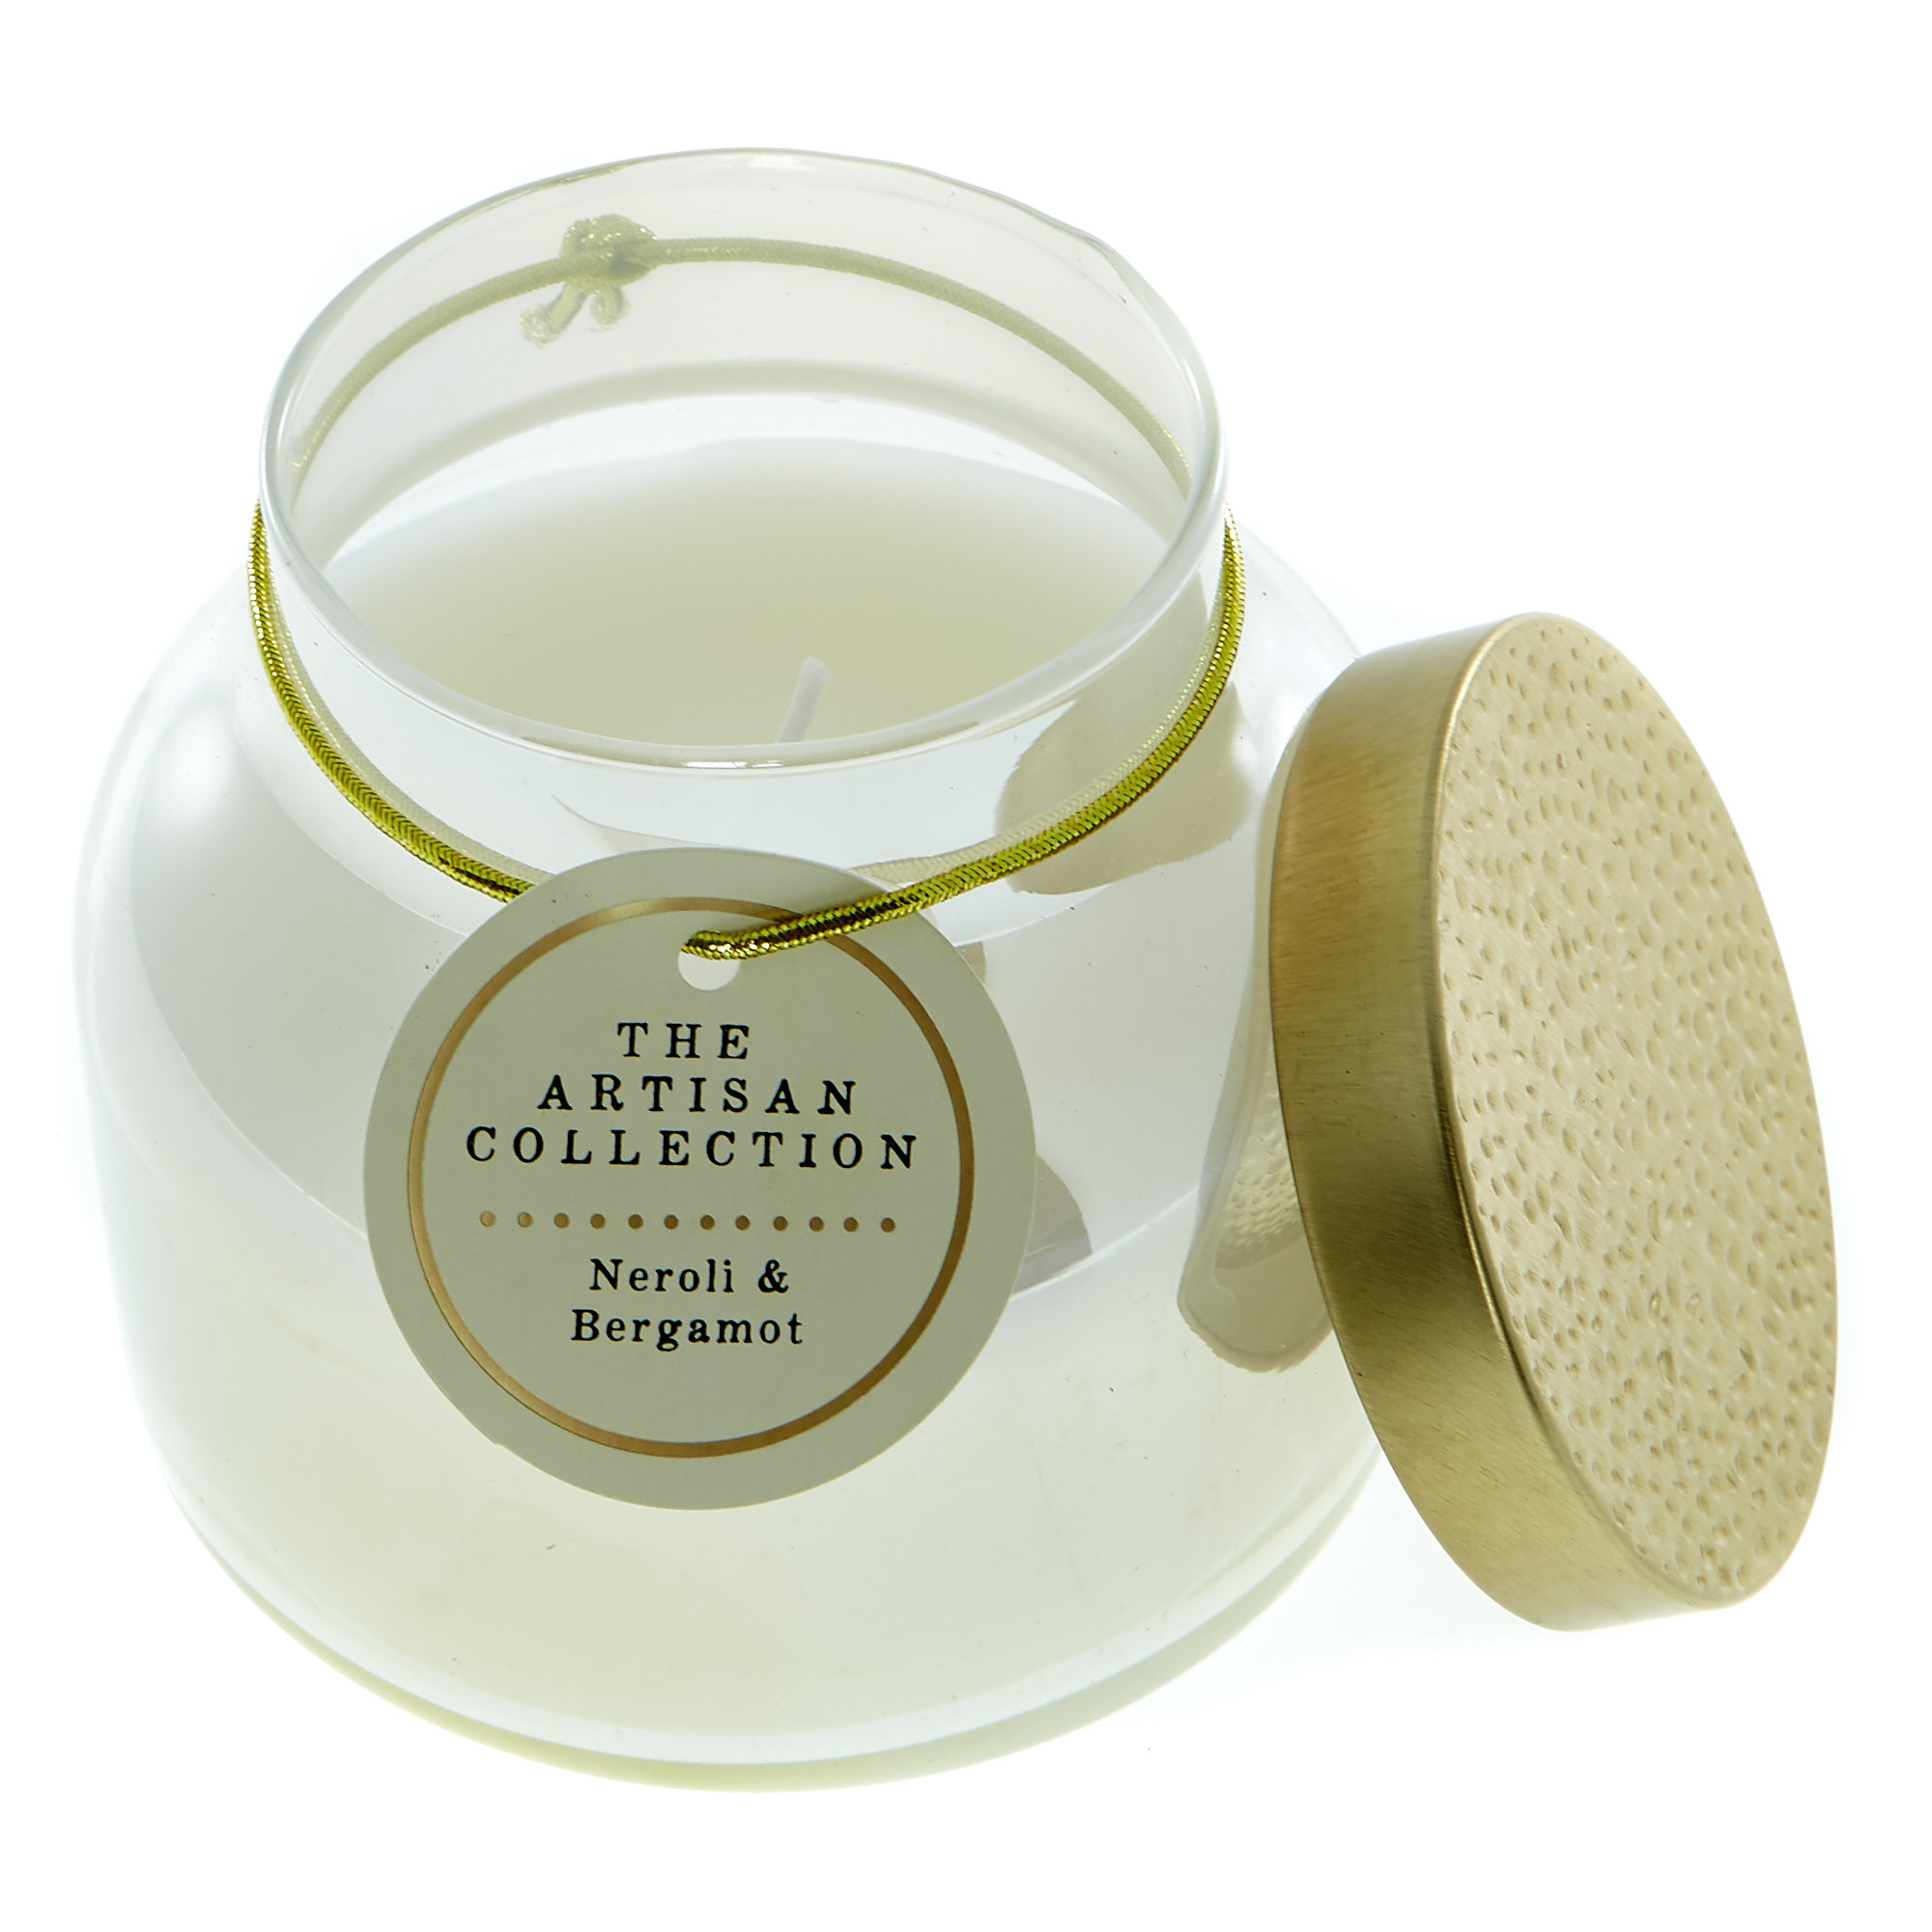 The Artisan Collection Neroli & Bergamot Scented Candle